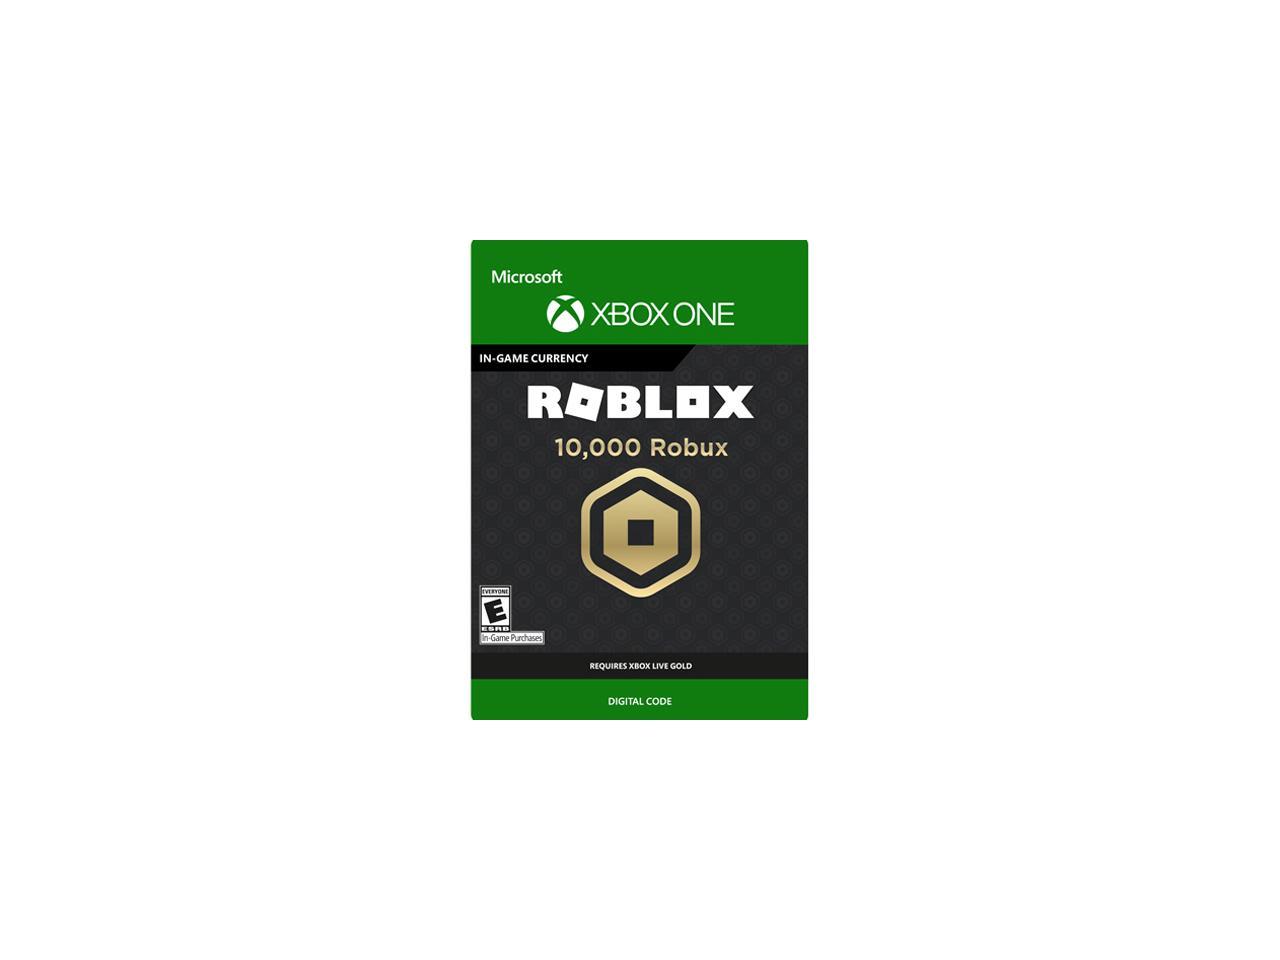 download roblox for xbox 3600